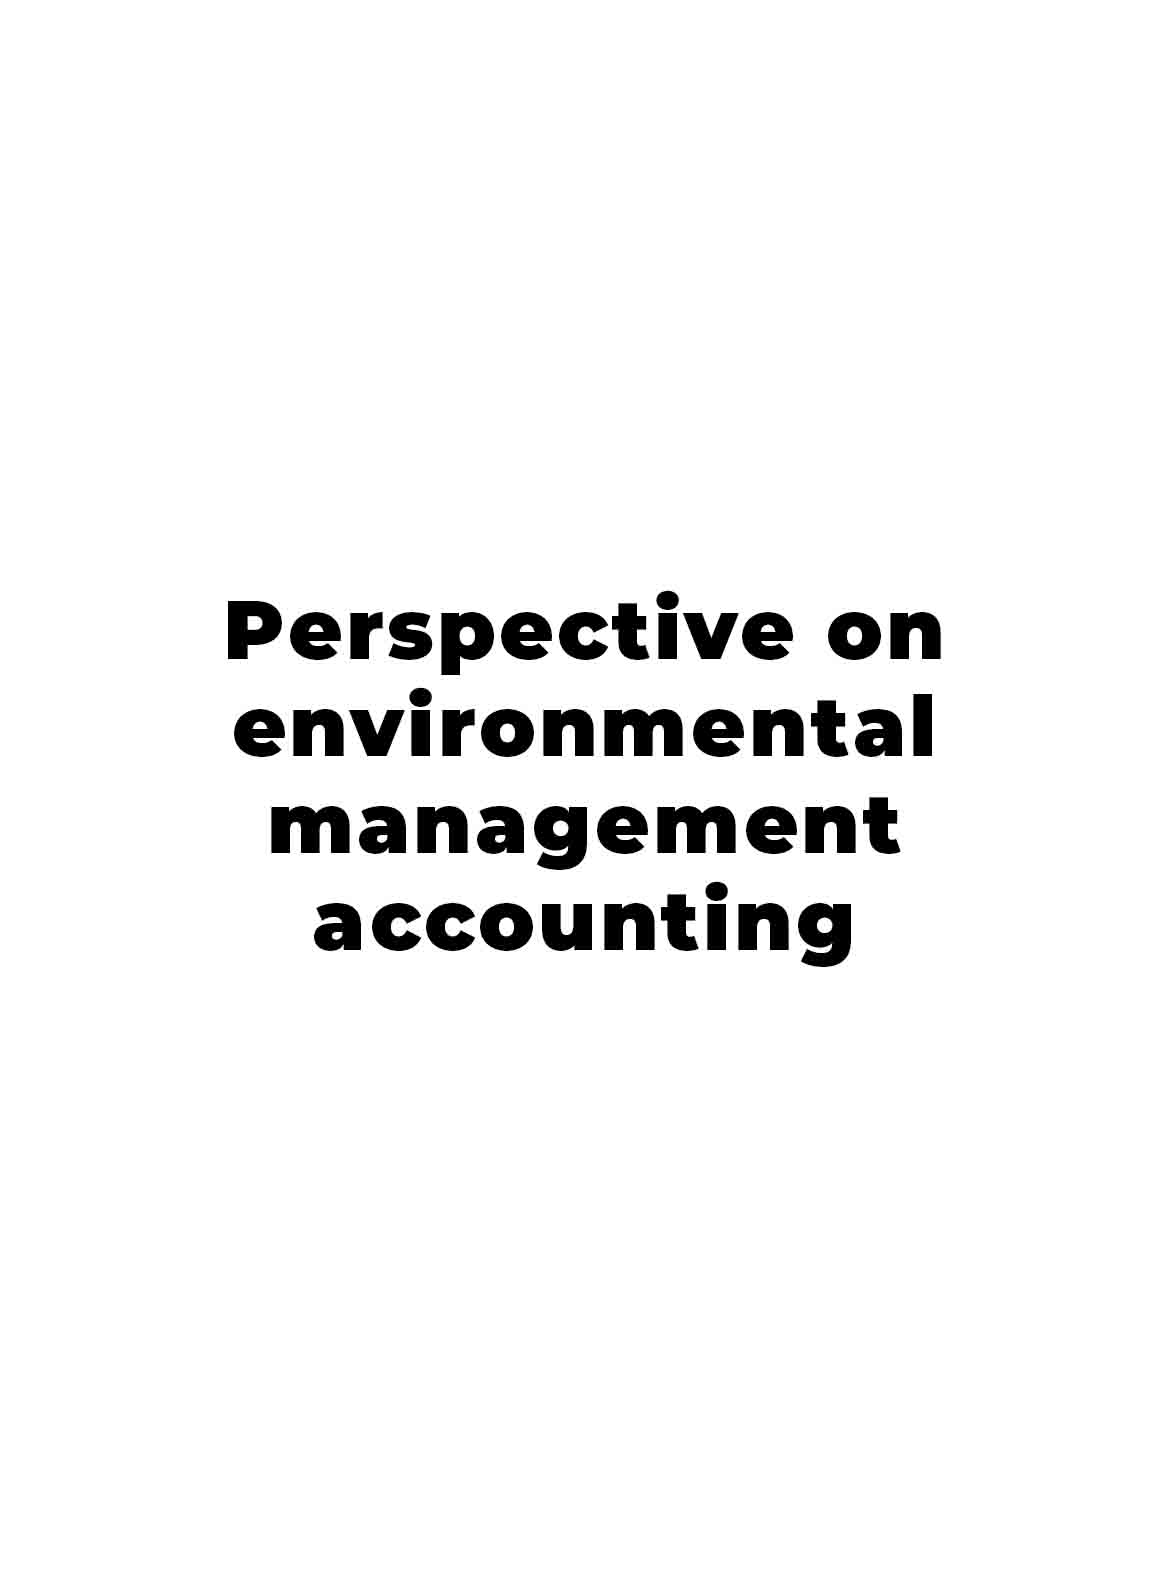 Perspective on environmental management accounting